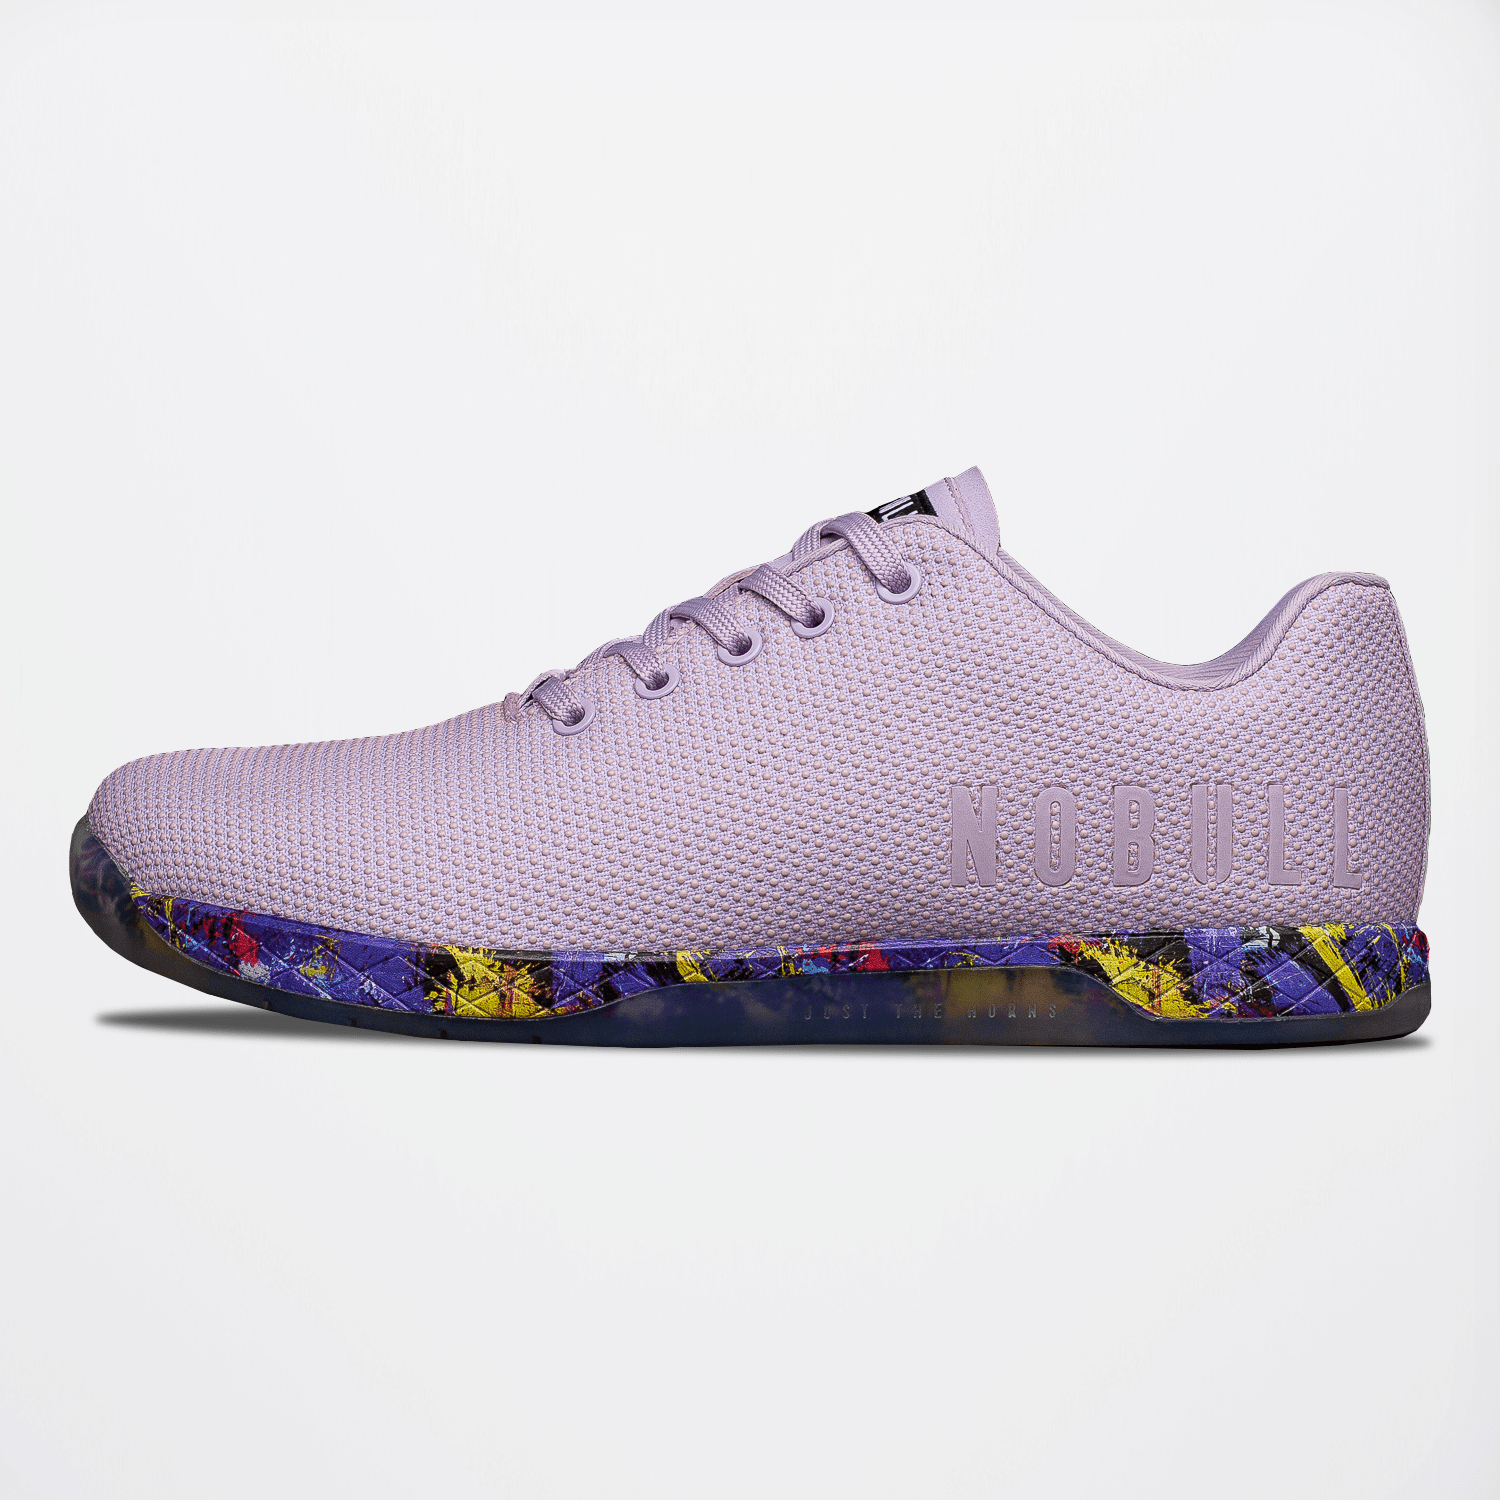 lavender trainers